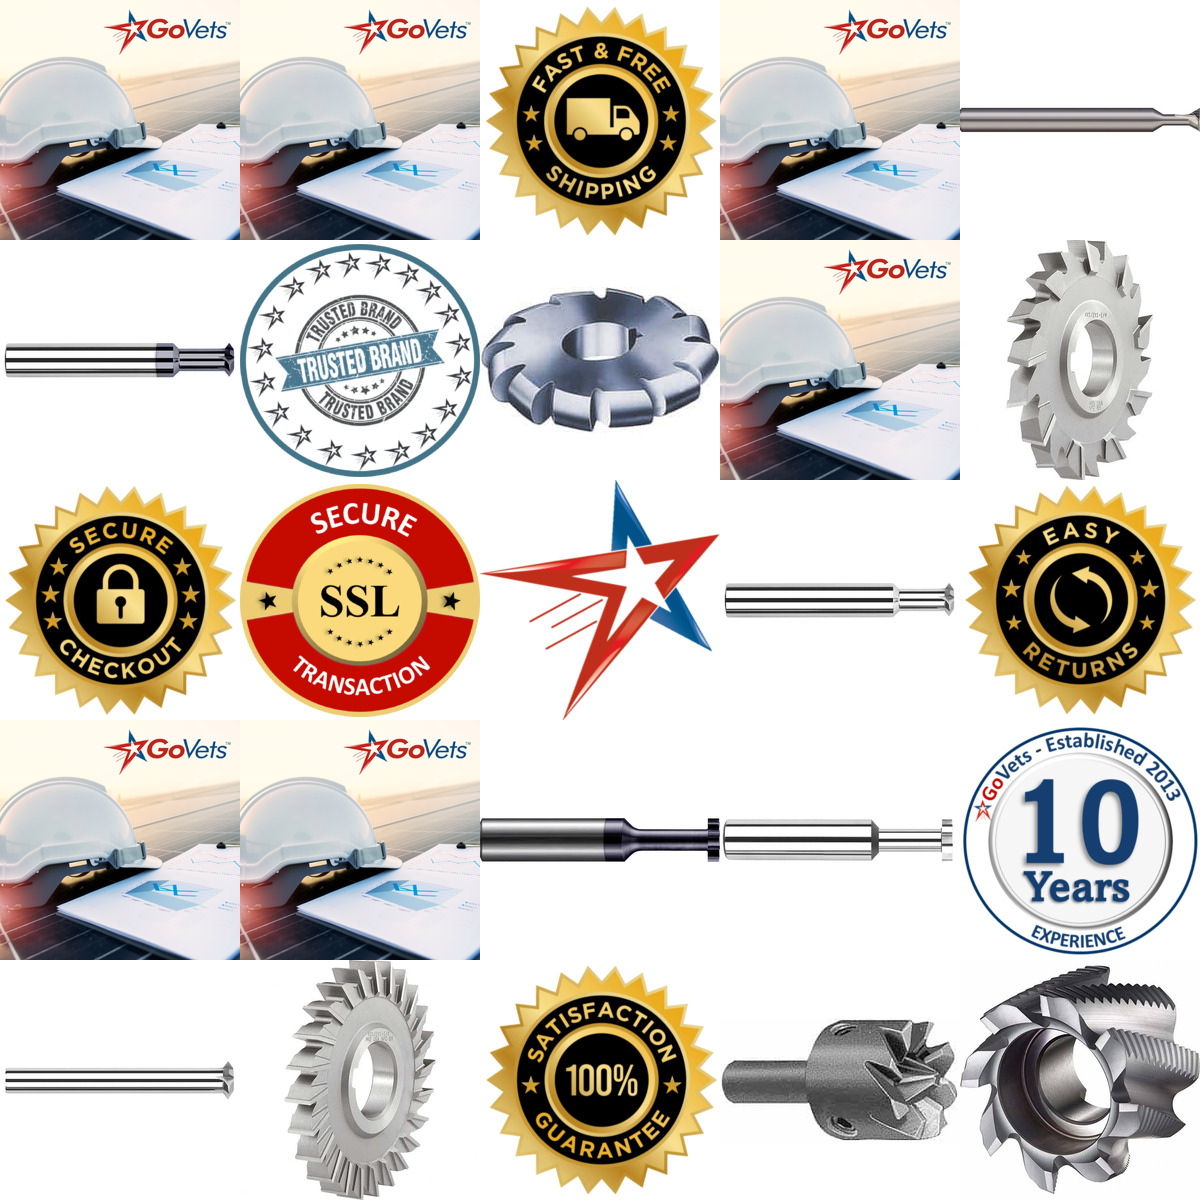 A selection of Milling Cutters products on GoVets